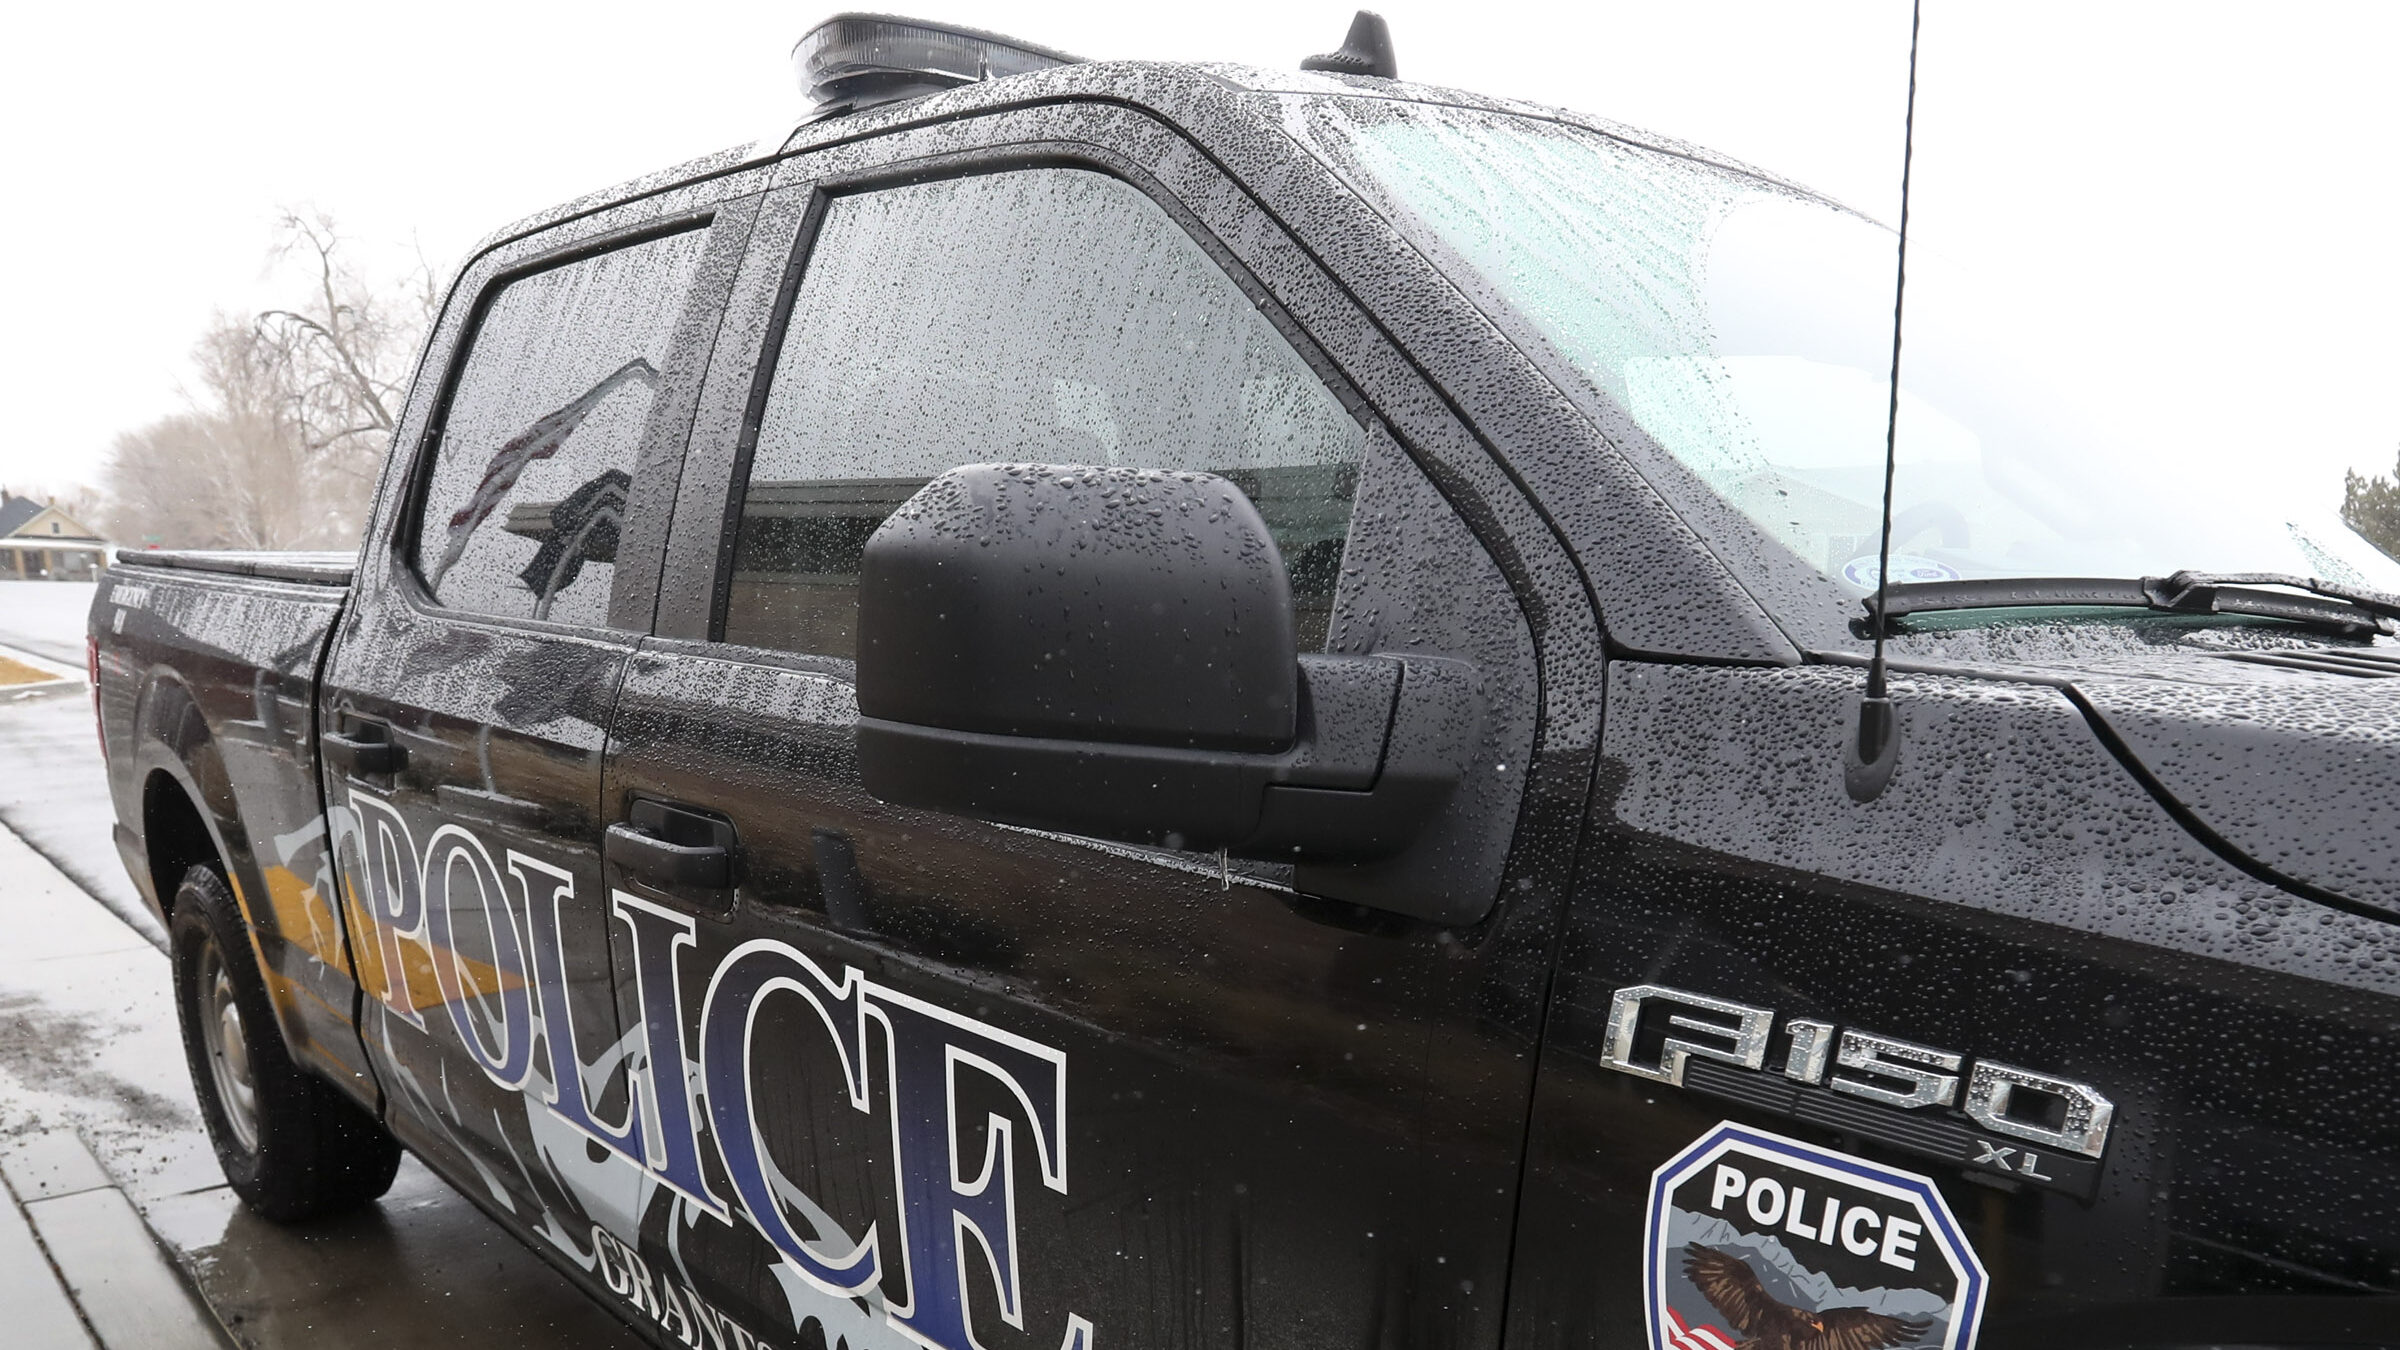 A Grantsville police vehicle is pictured in Grantsville on Monday, Dec. 28, 2020. Photo credit: Ste...